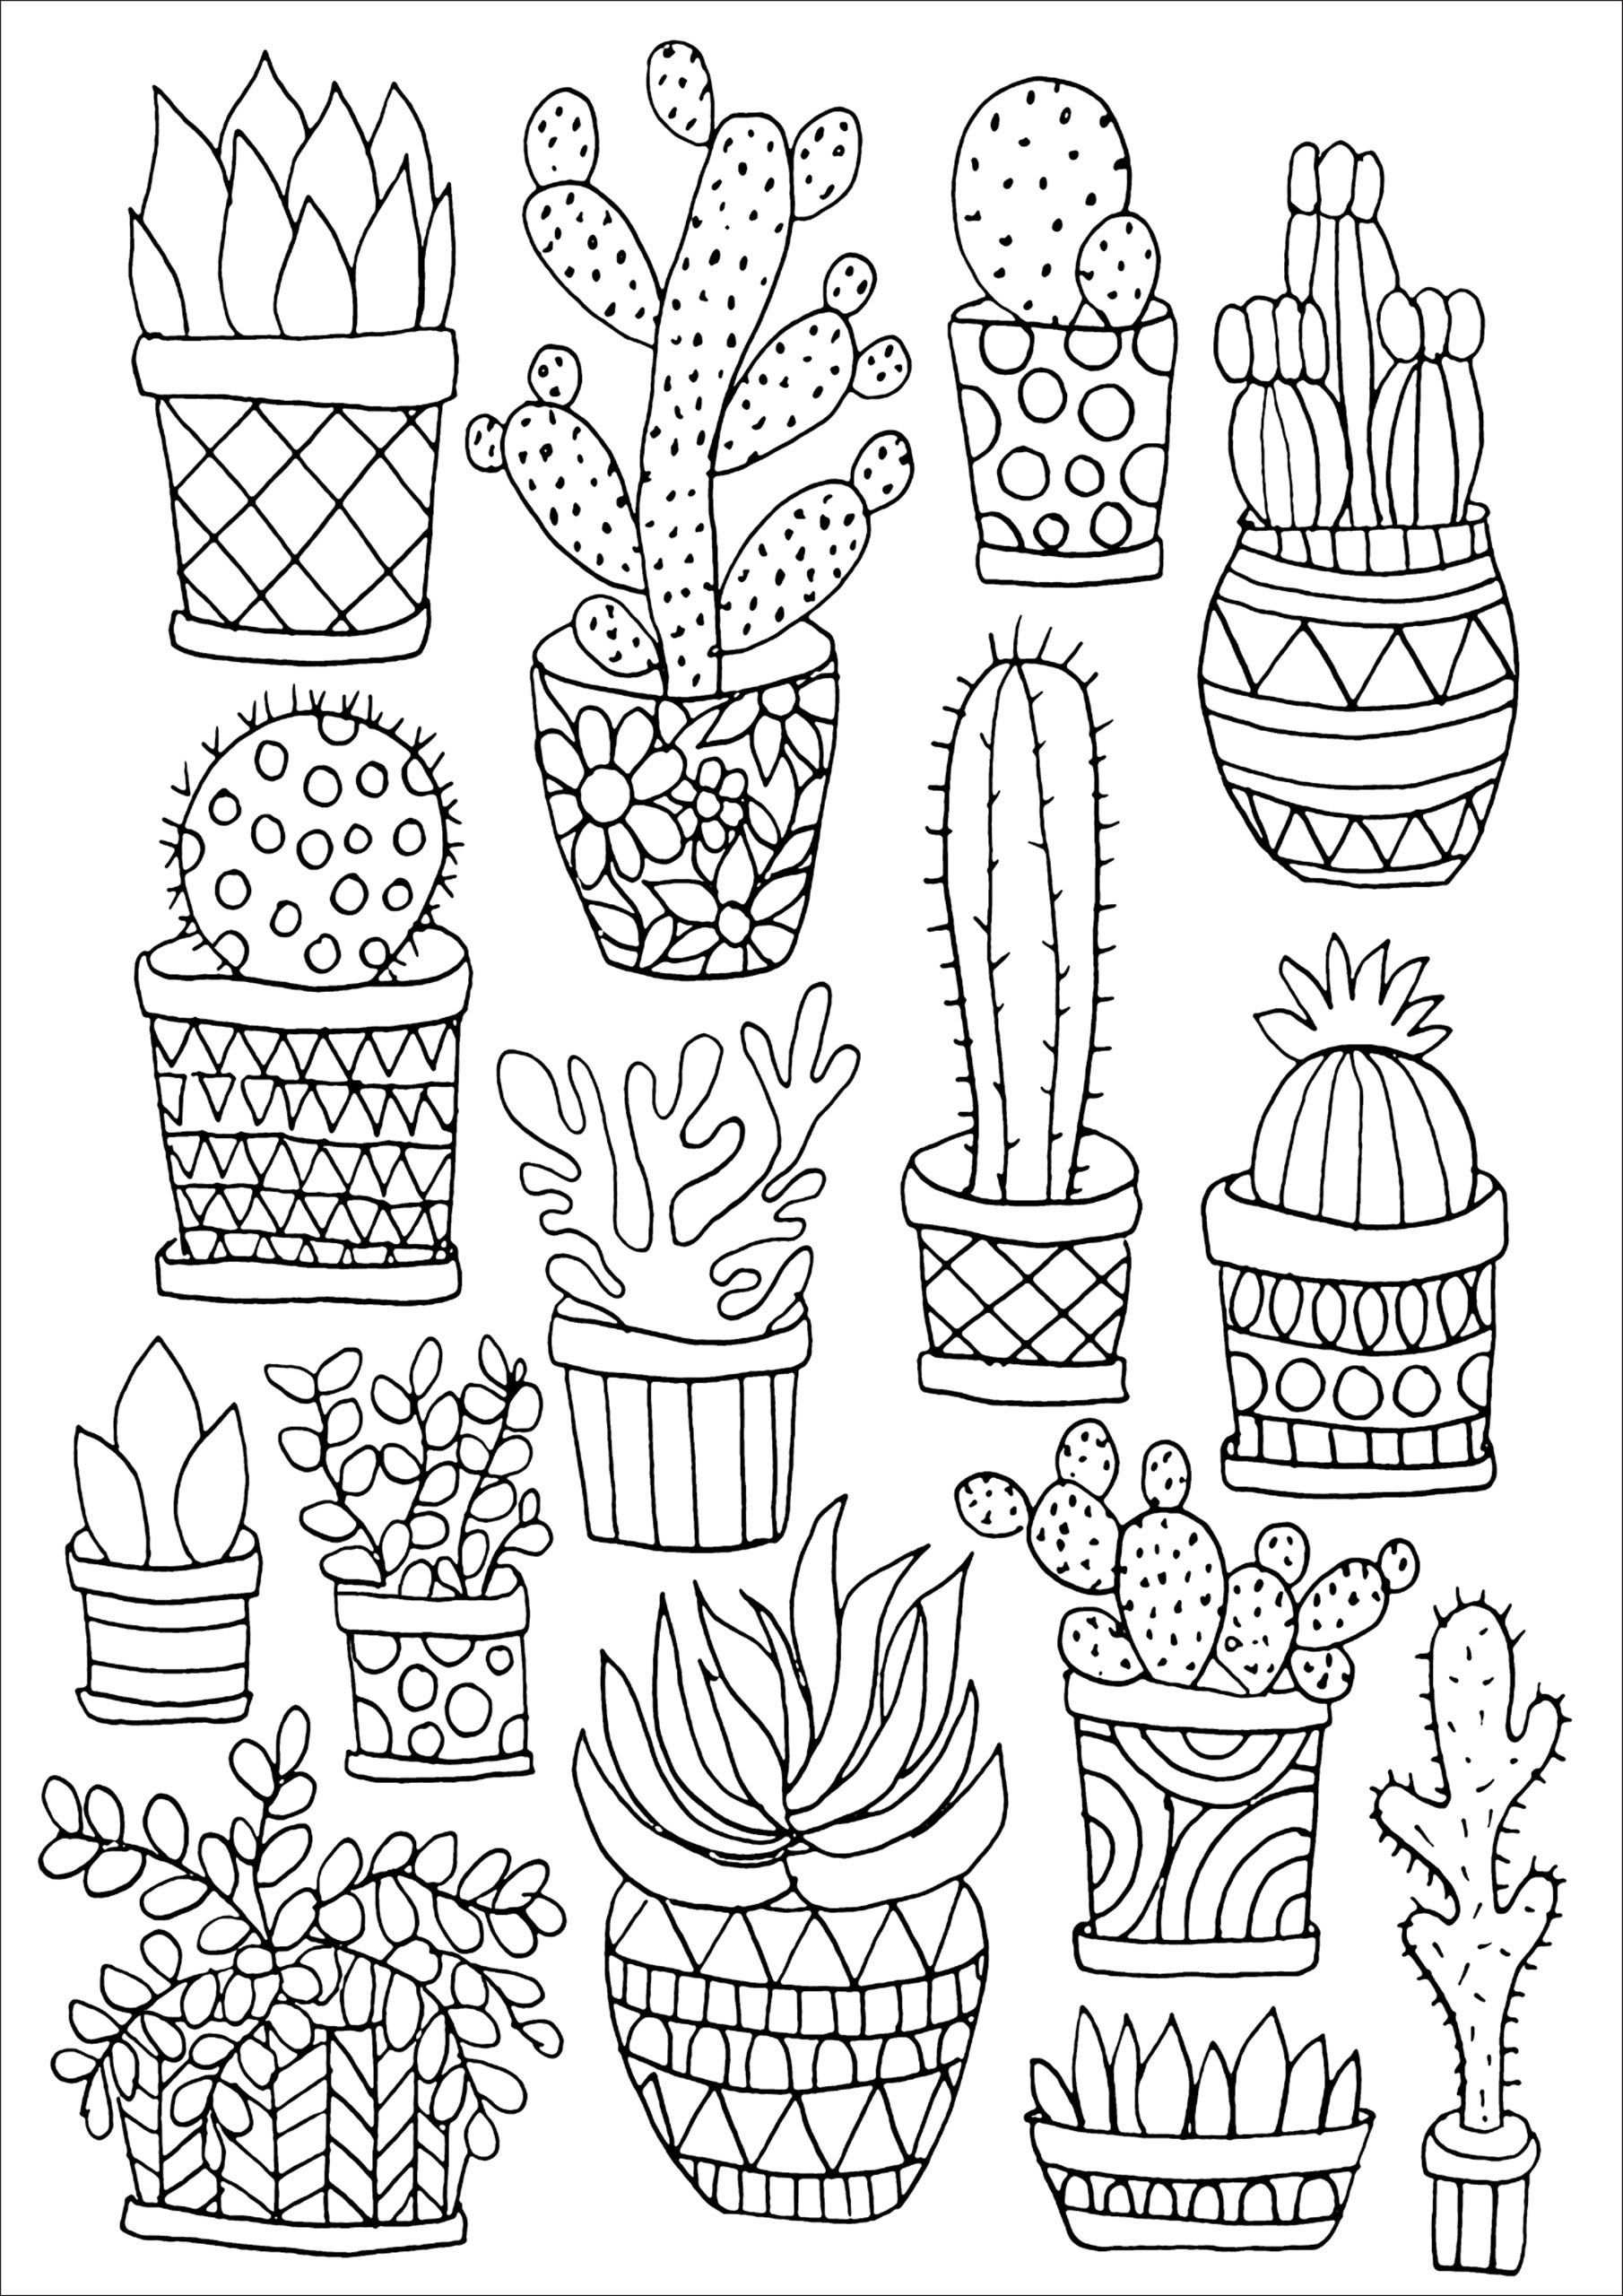 Amazonsmile Succulents Portable Adult Coloring Book 31 Stress